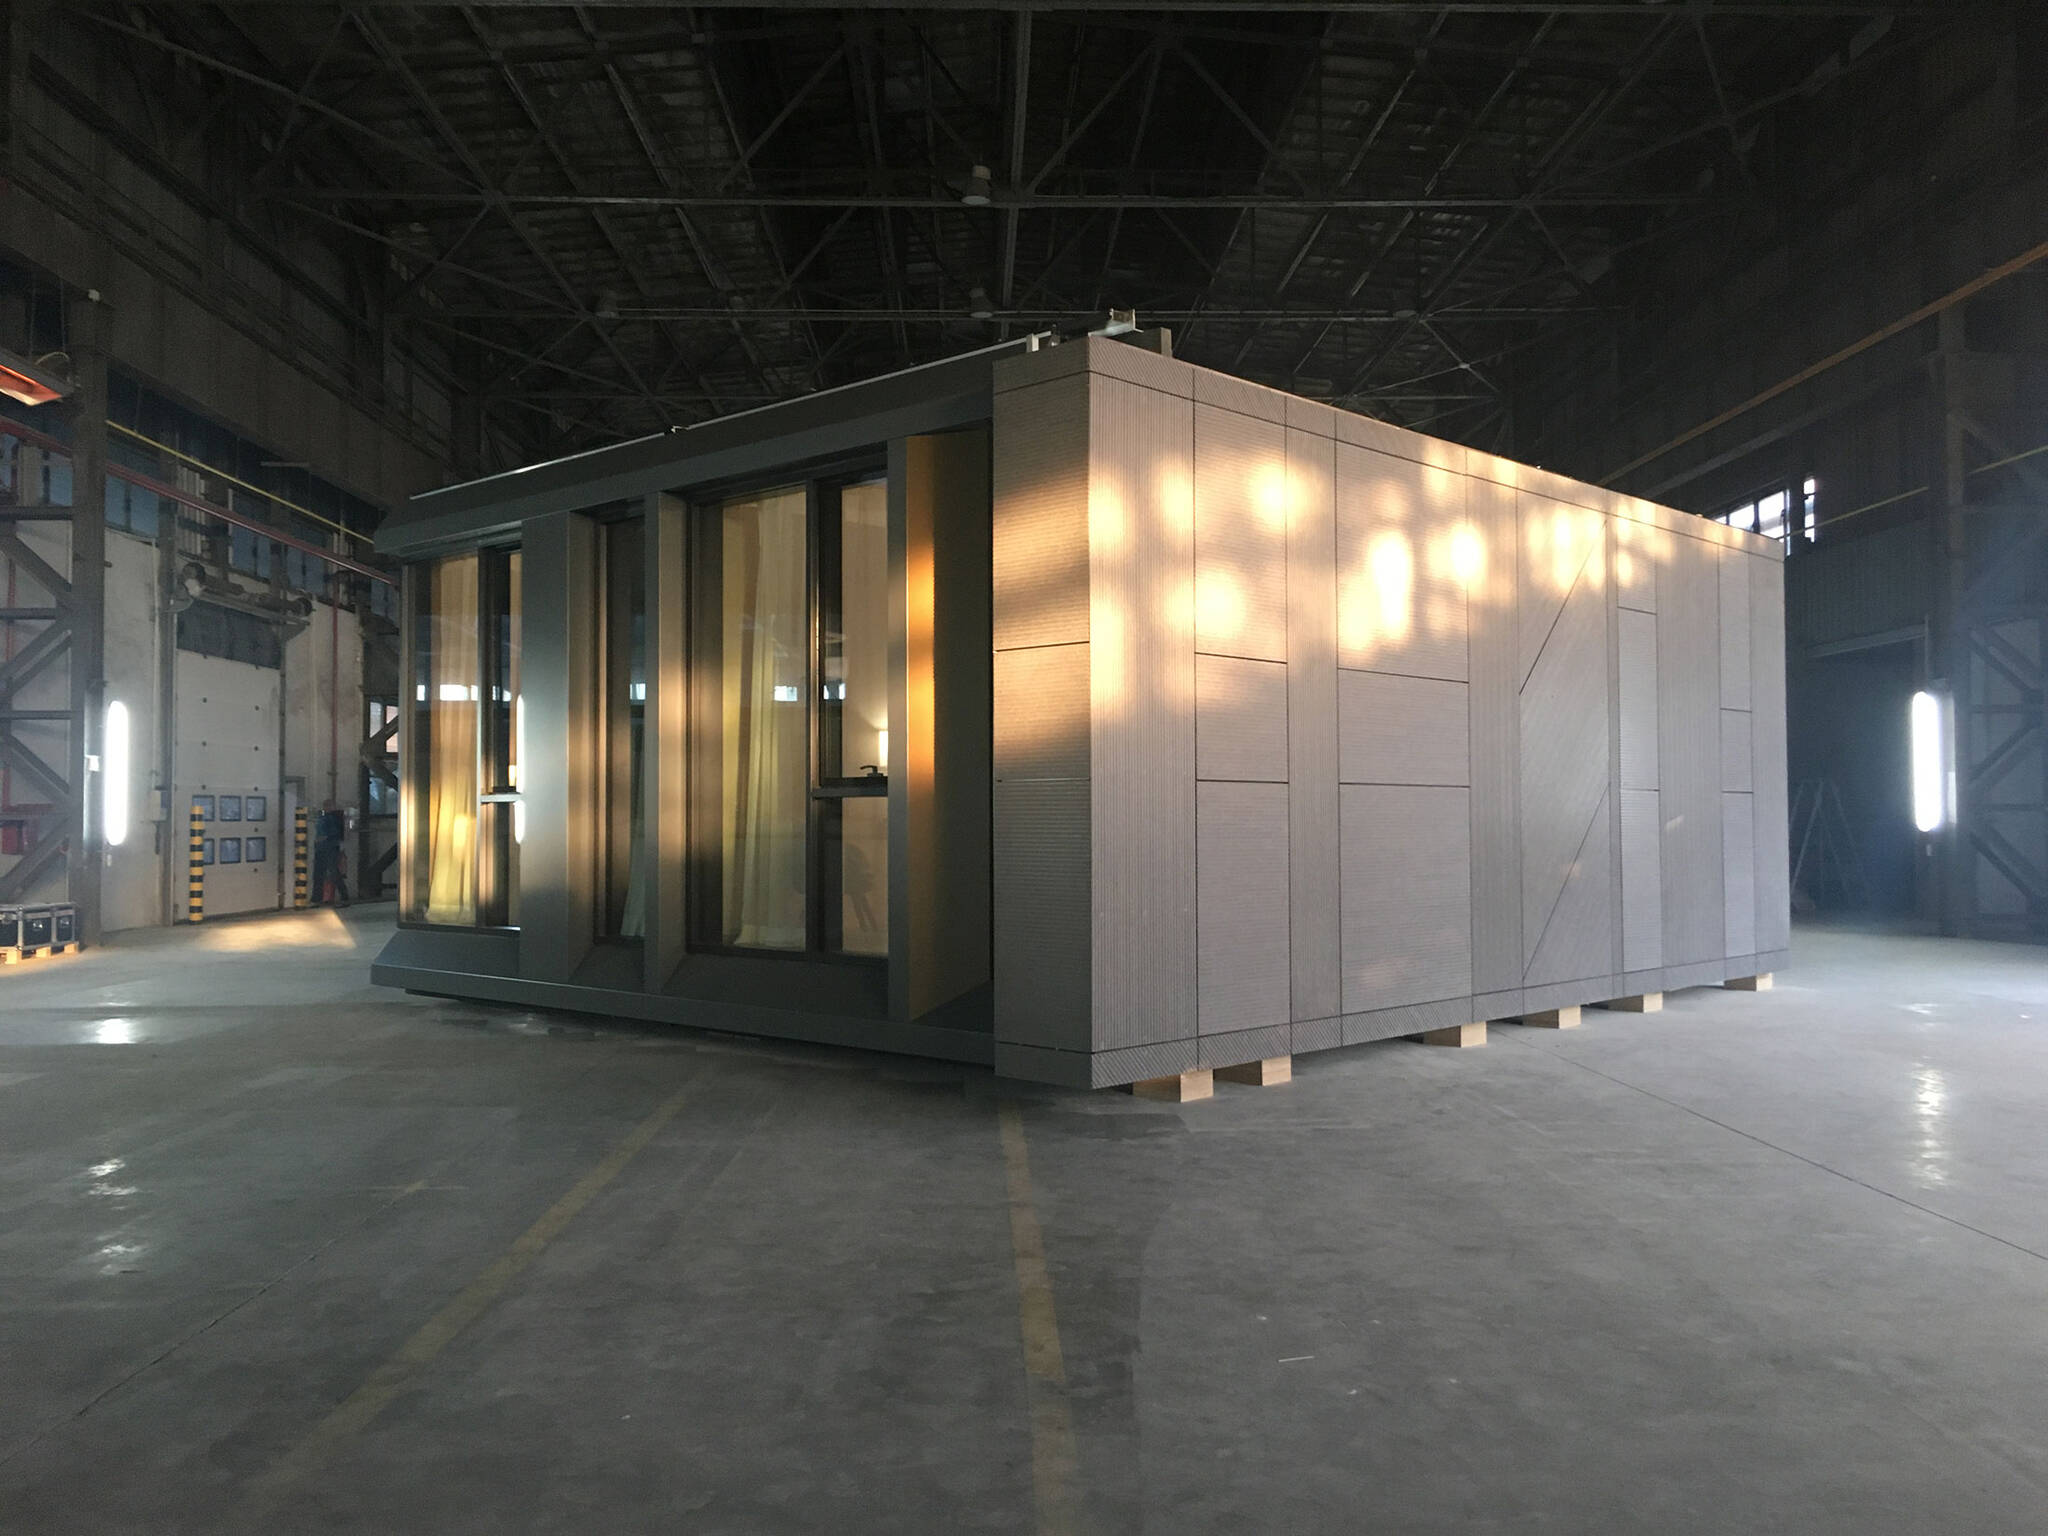 Off-site assembled module for the Modular AC Hotel project located at 842 Sixth Avenue in NoMad, New York City designed by the architecture studio Danny Forster & Architecture